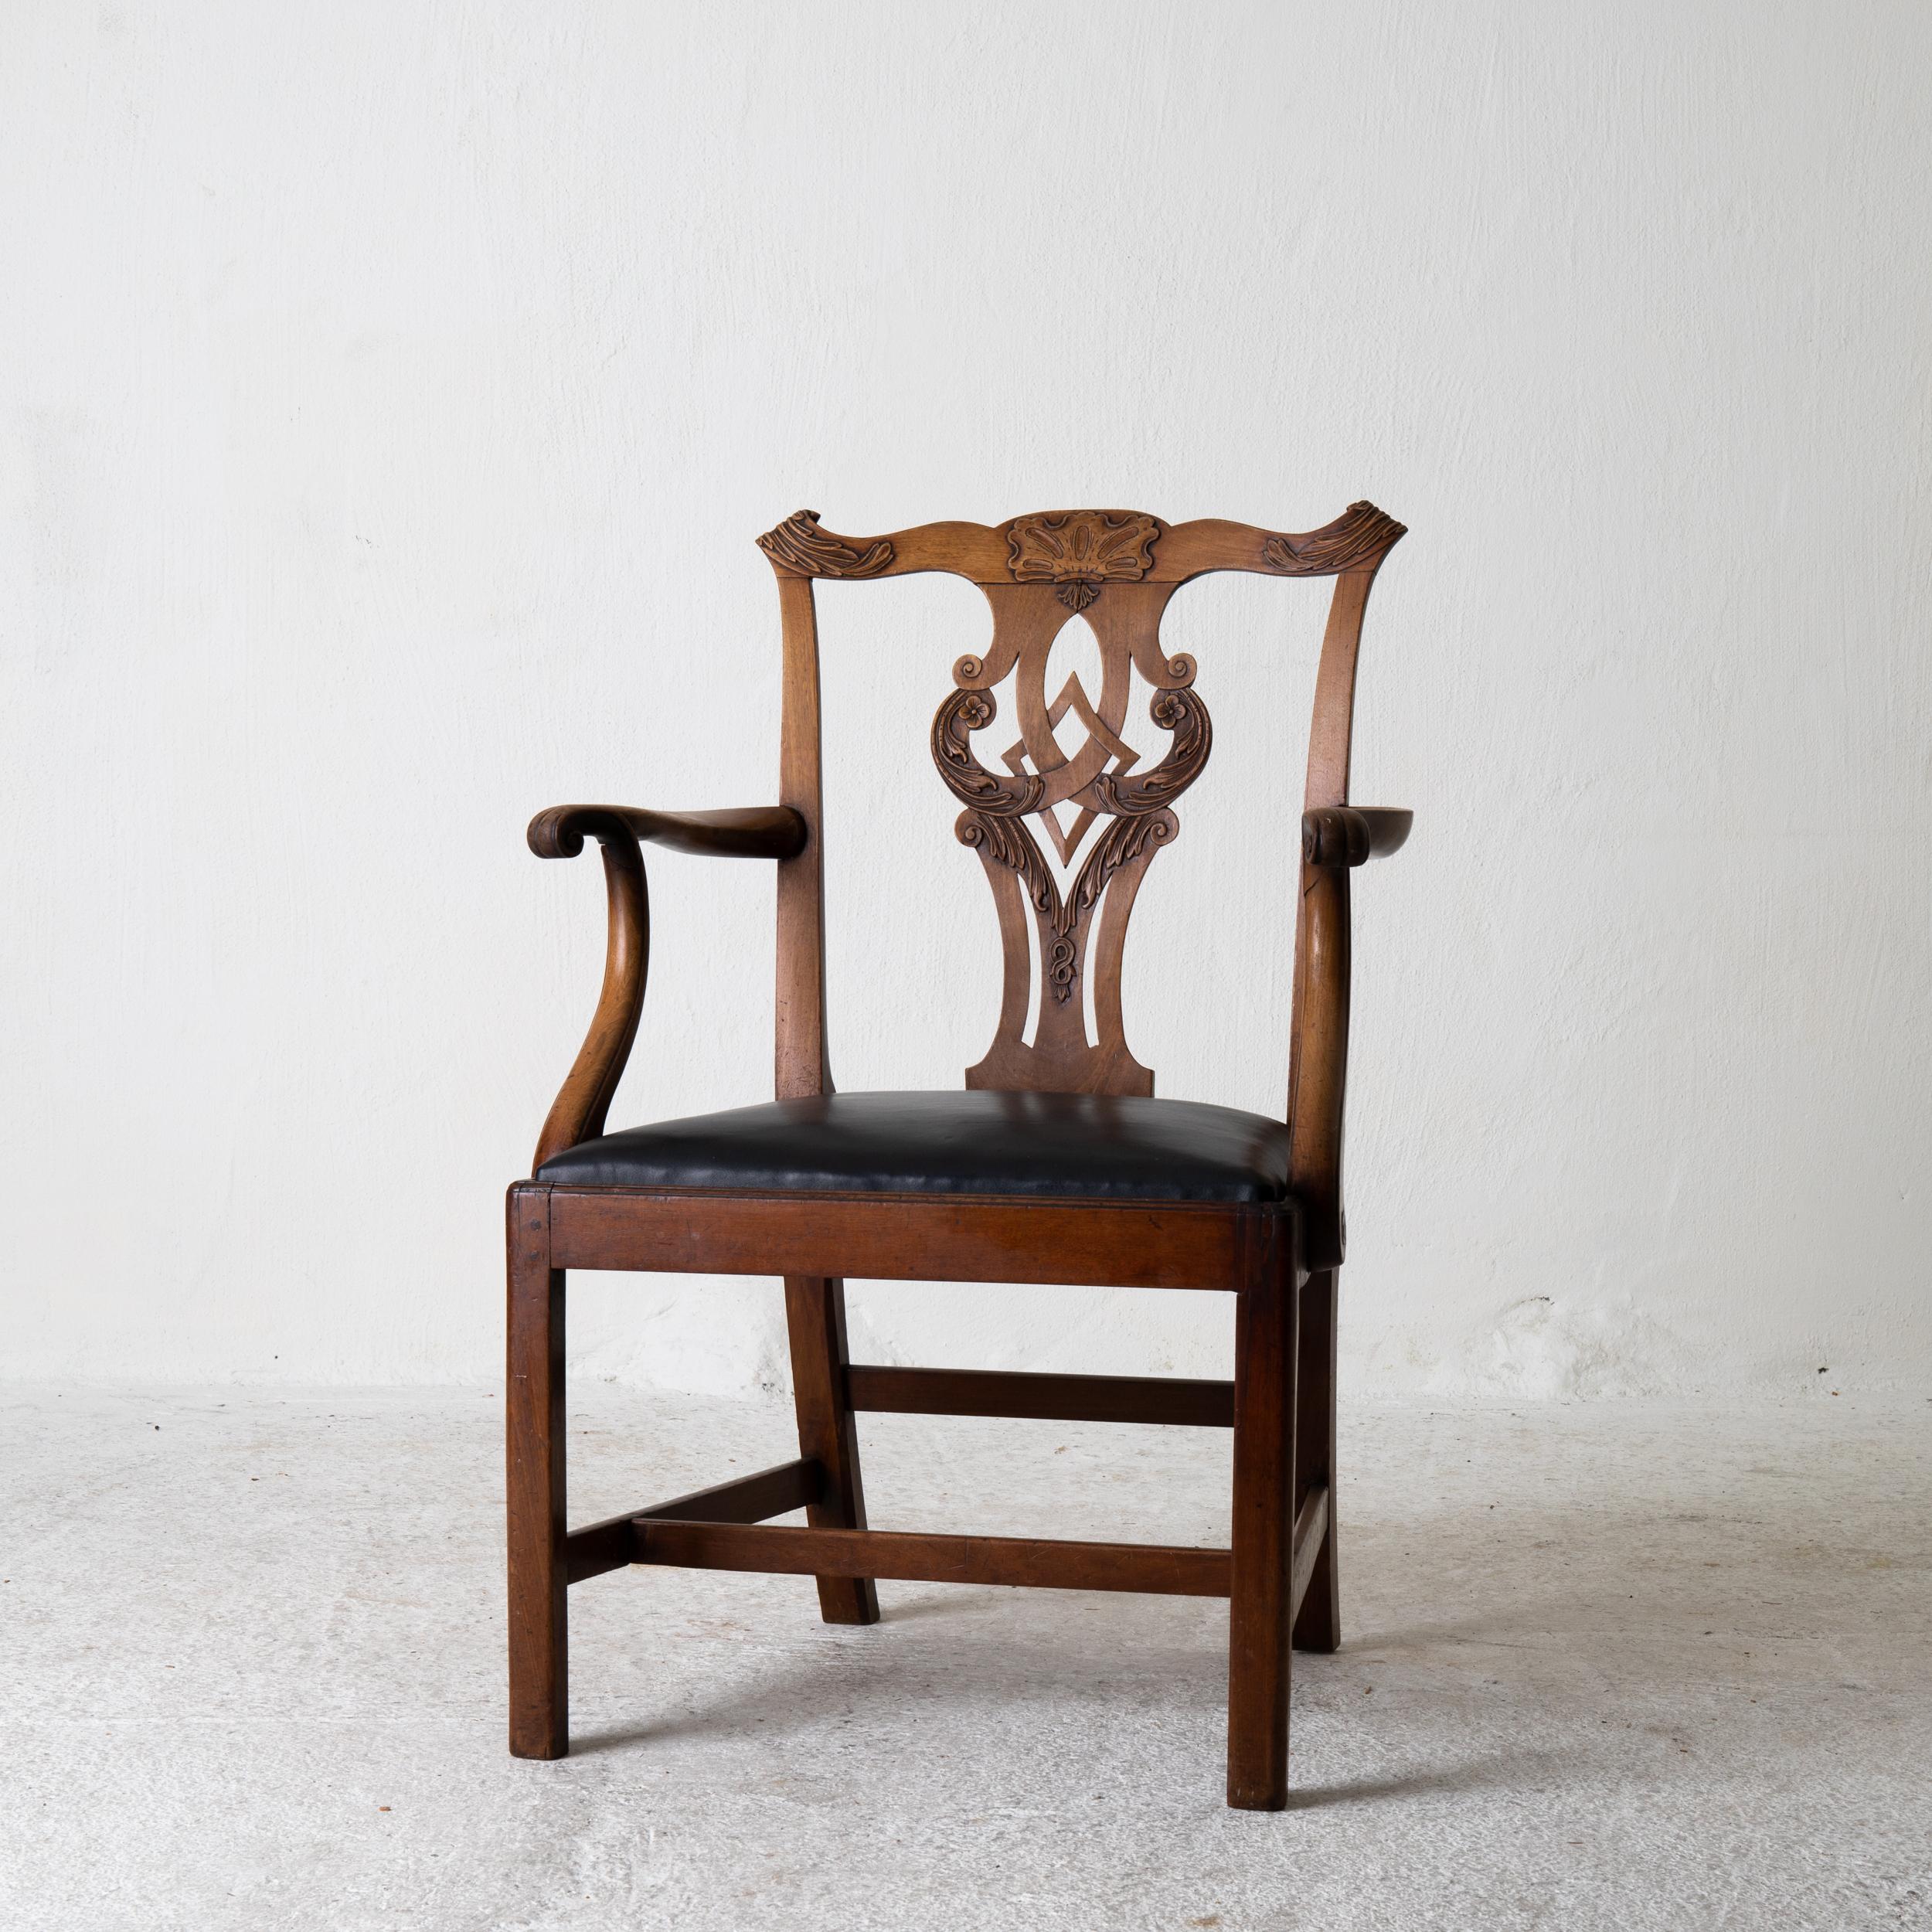 An armchair made during the 18th century and Chippendale period in England. Generous sized chair. Seat upholstered in black leather.